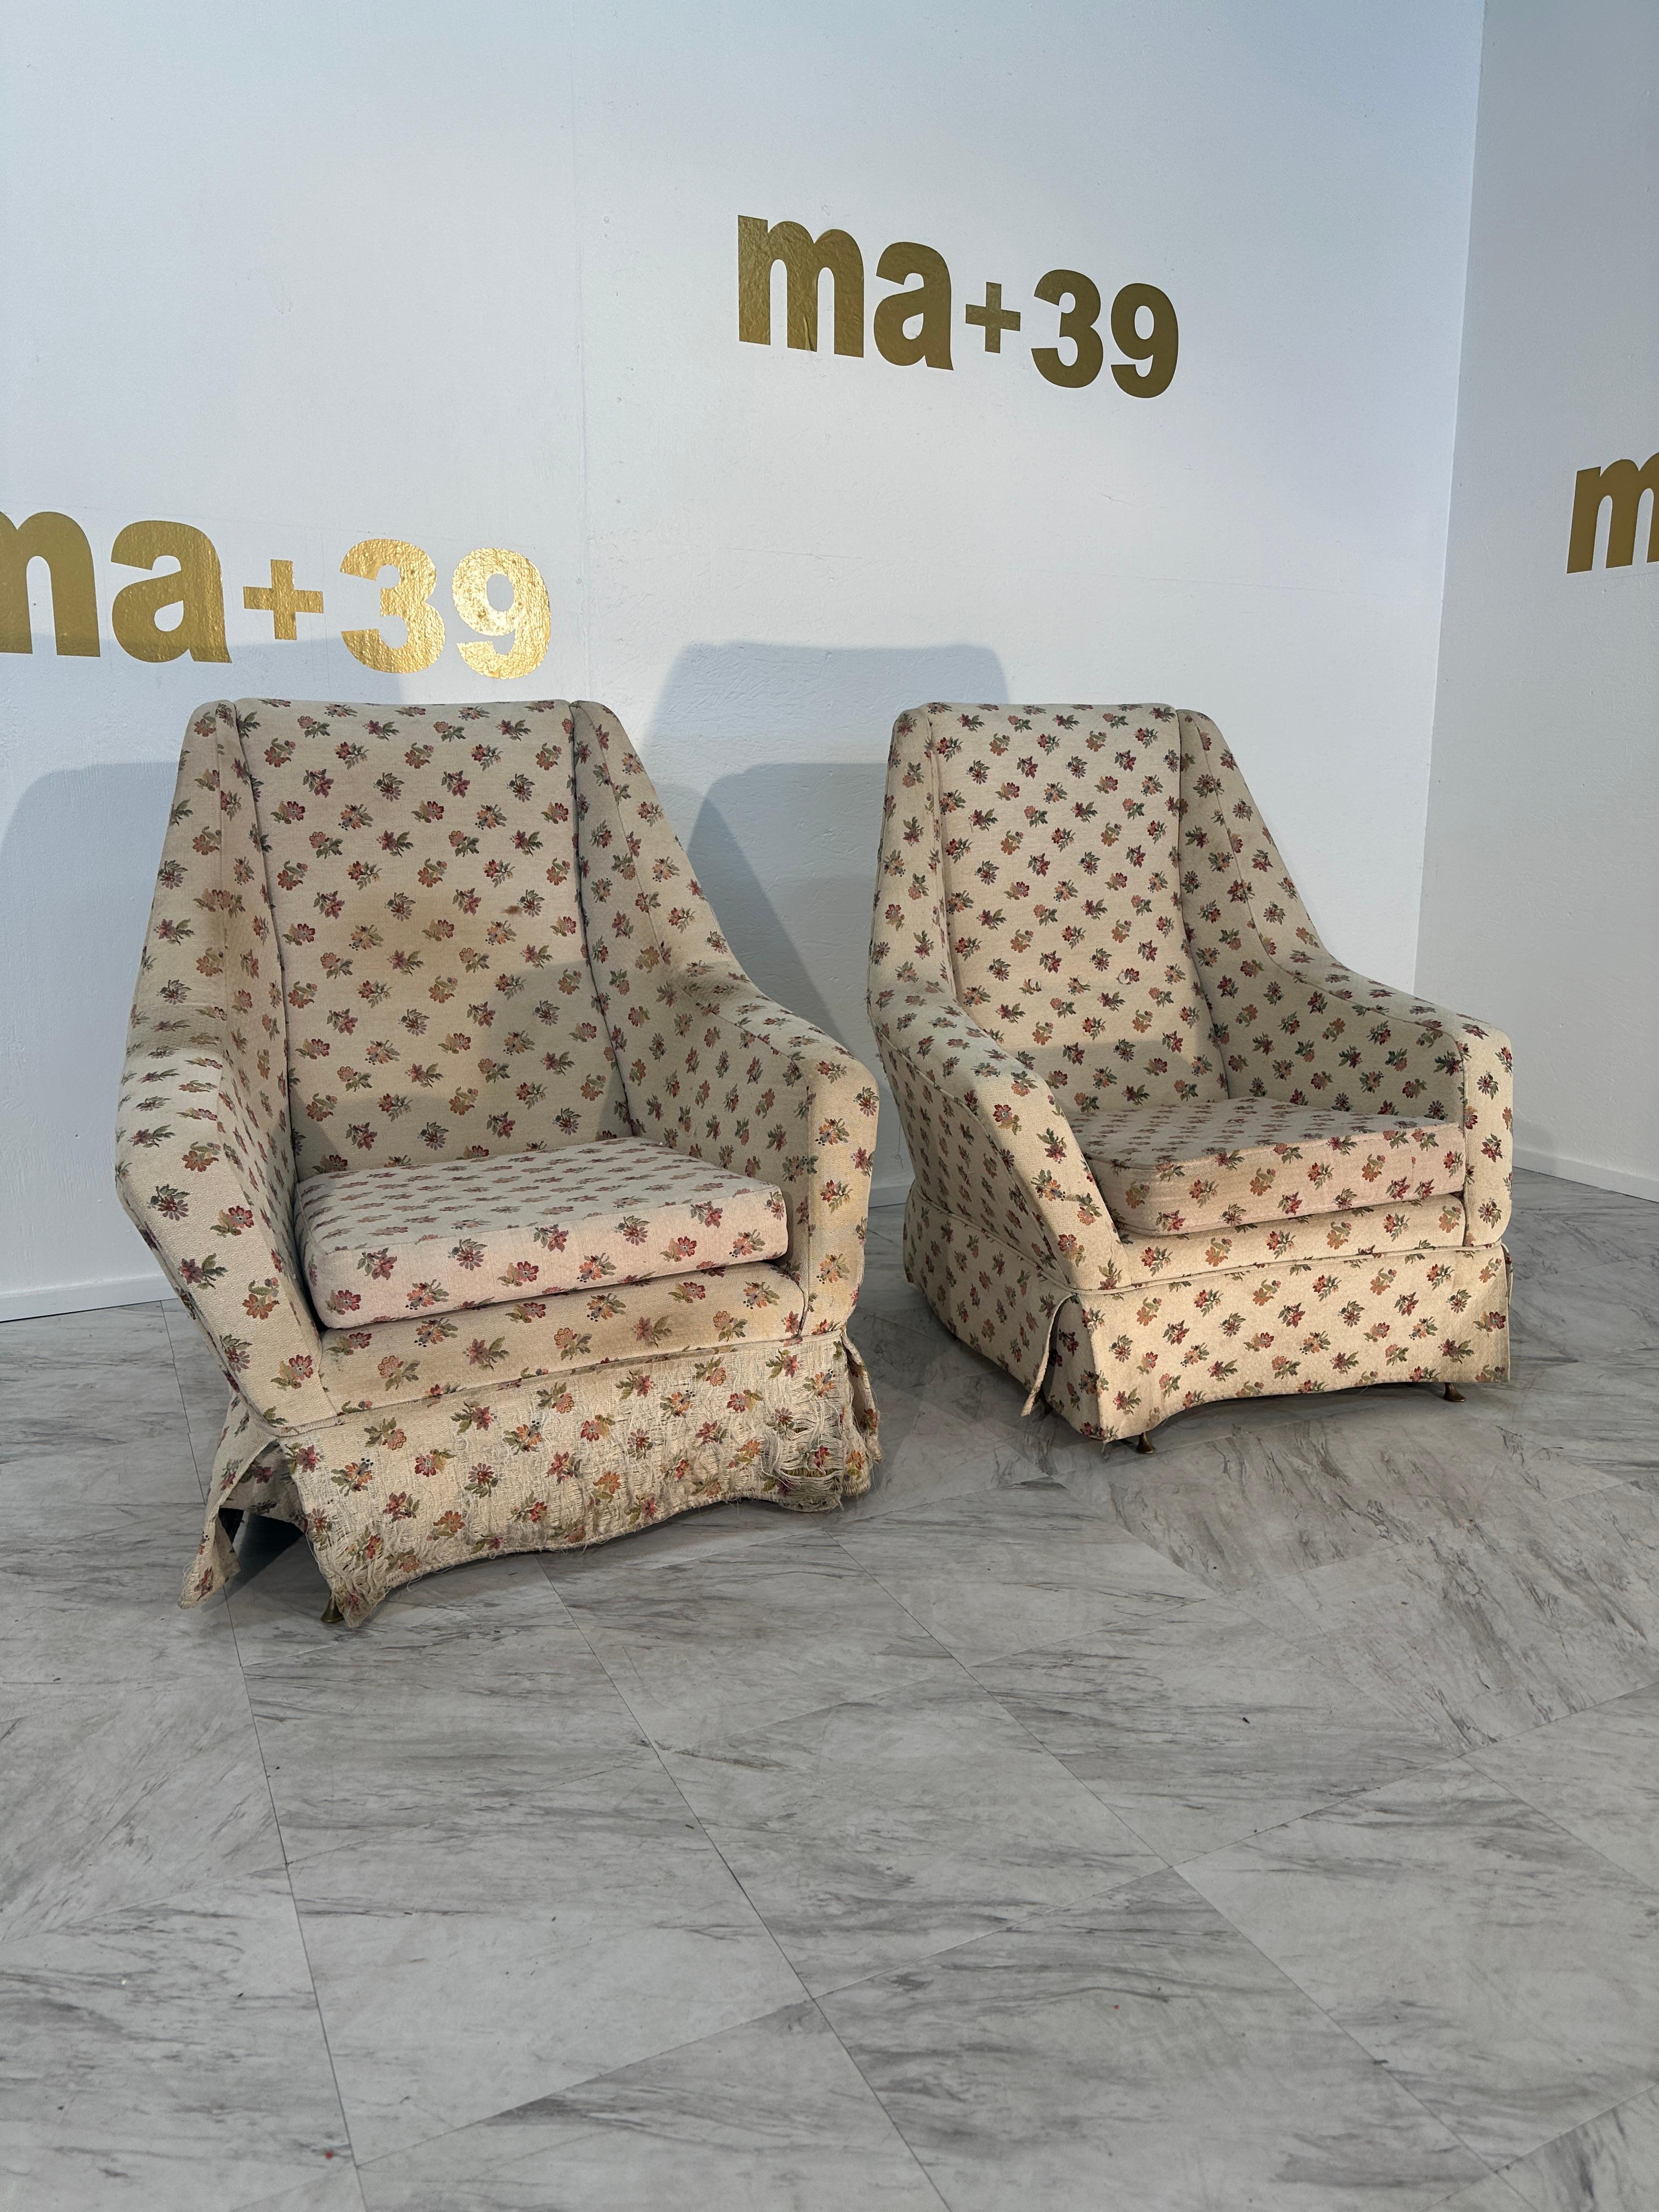 The Pair of 2 Mid Century Italian Armchairs from the 1960s showcase a distinctive and unique design, making them stand out as statement pieces. The chairs feature a brass frame, adding a touch of opulence and sophistication to their aesthetic. What